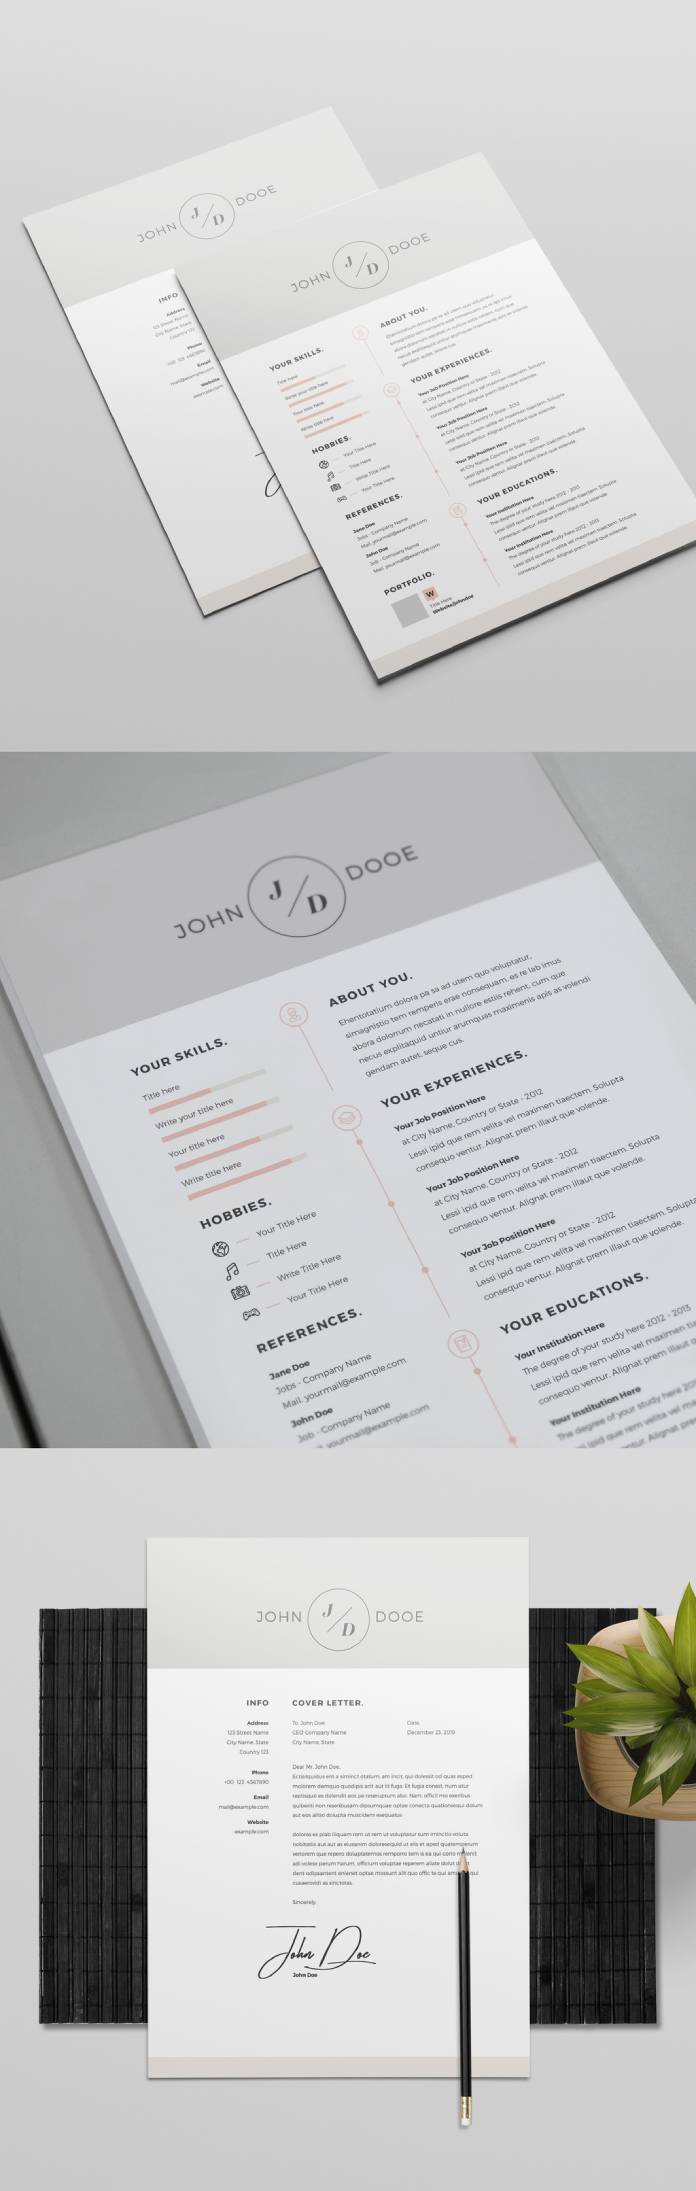 Adobe InDesign Resume Template with Gray Header and Footer